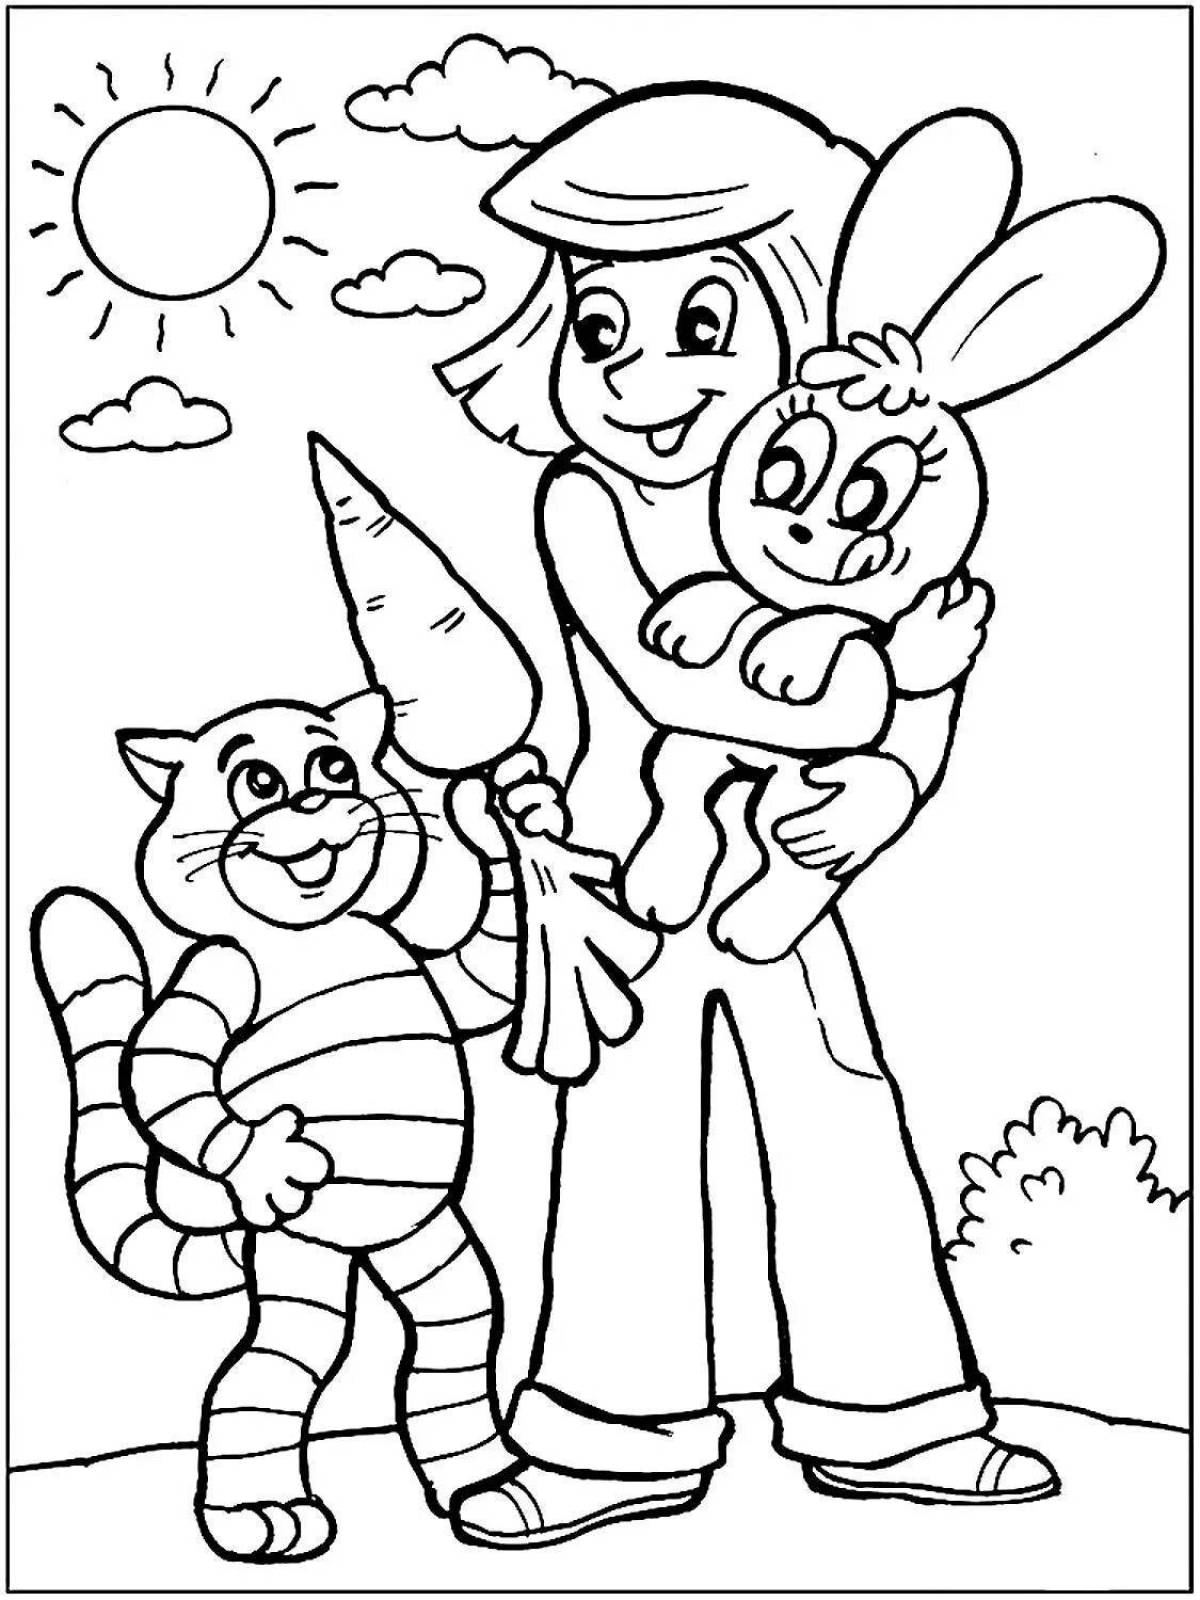 Gorgeous sailor skin coloring page for preschoolers